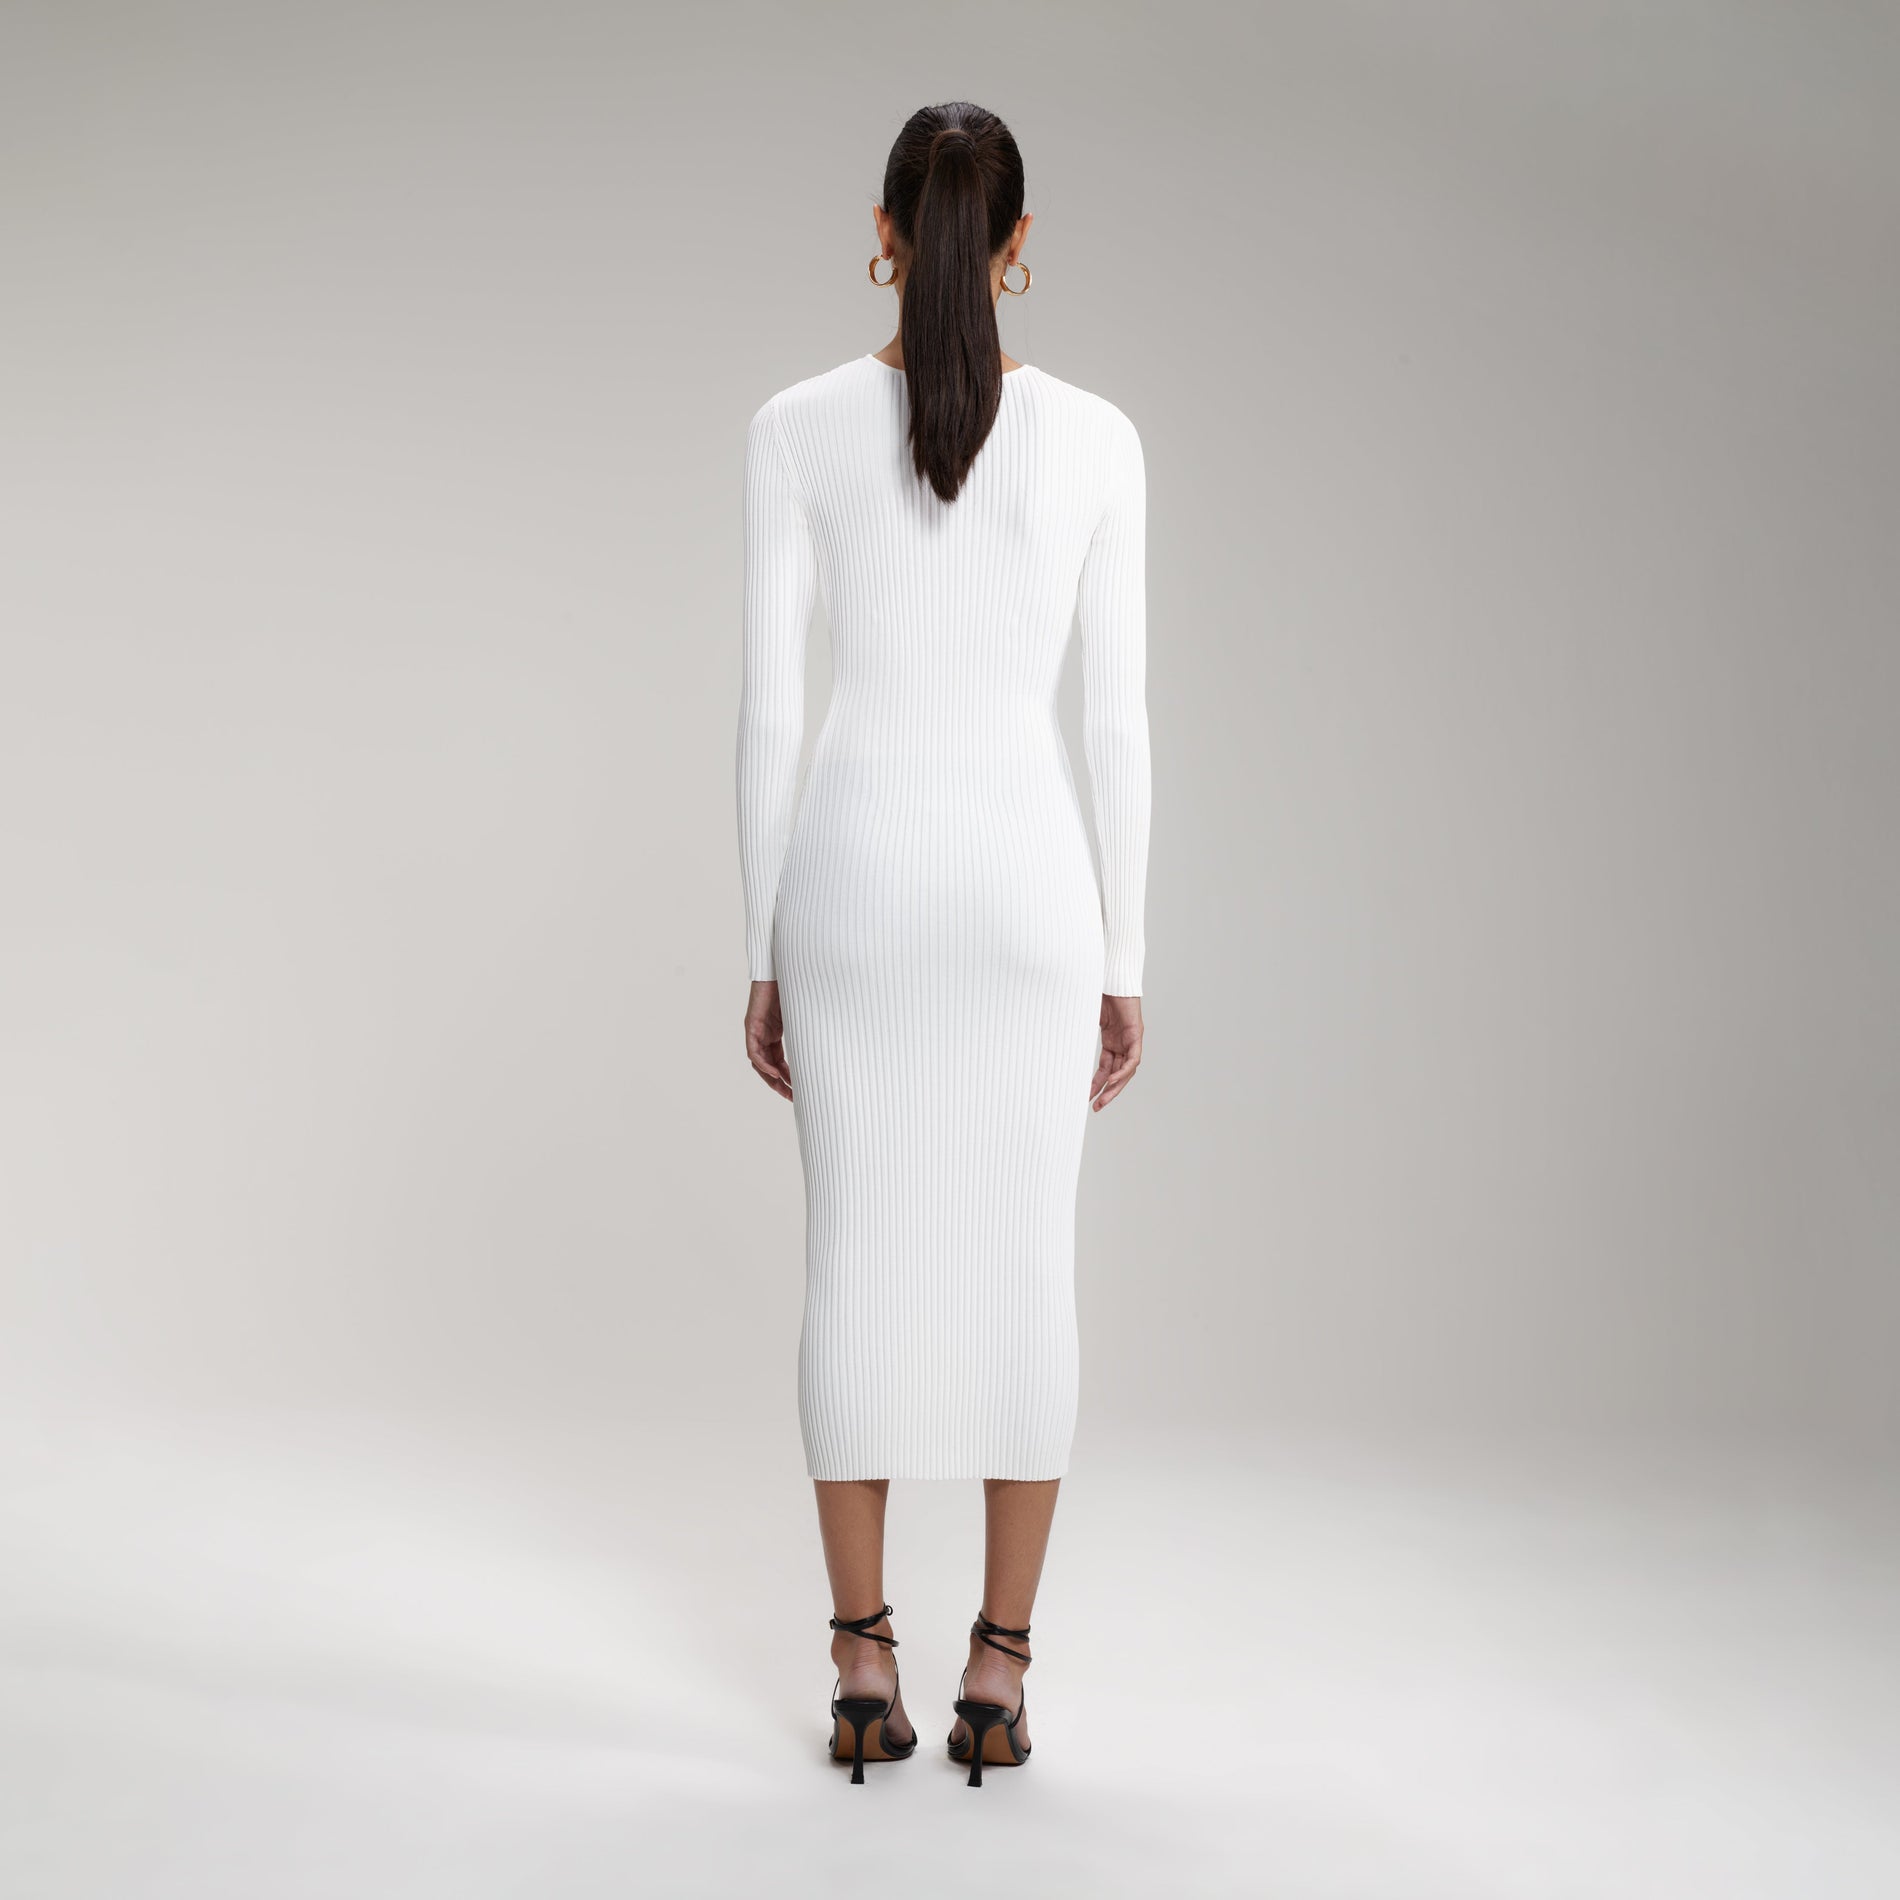 A woman wearing the White Ribbed Knit Cut Out Midi Dress